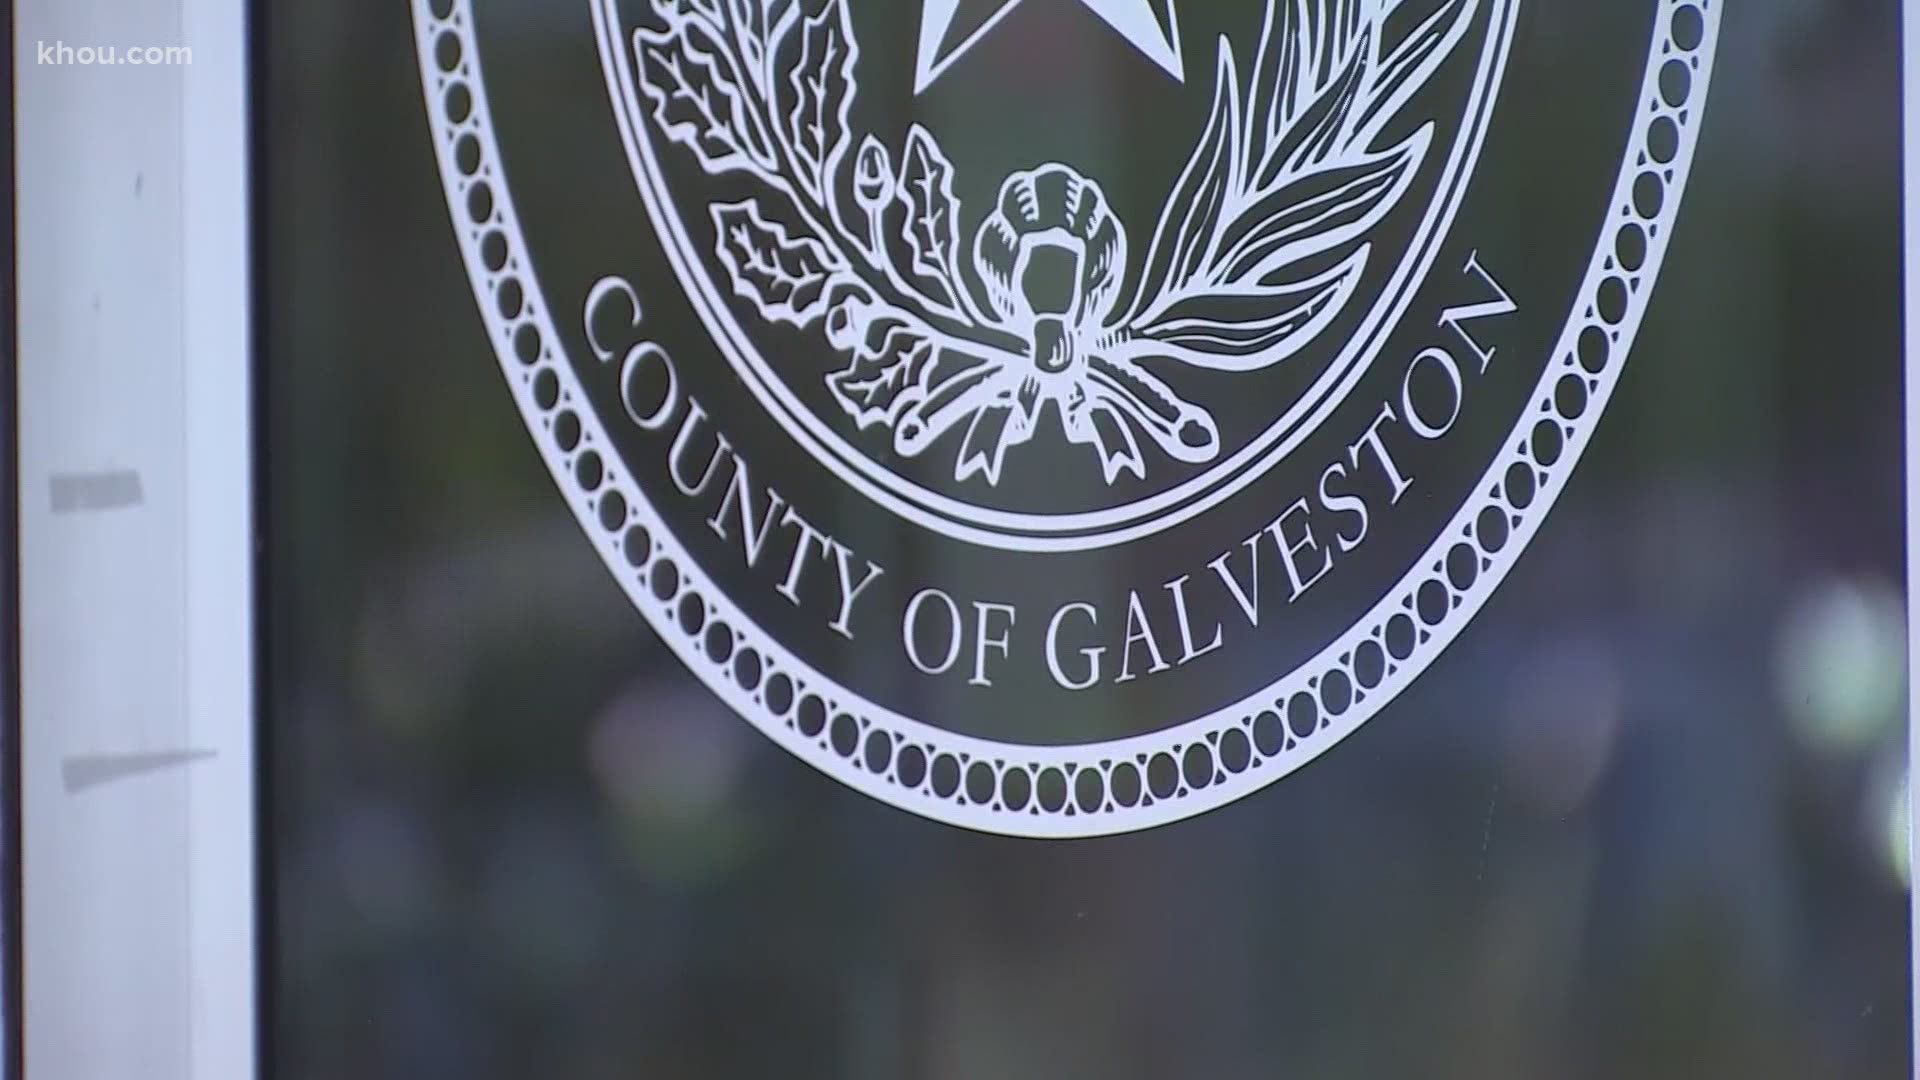 Galveston, Brazoria and Chambers are among the SE Texas counties ordered to roll back their reopening plans because of high hospitalization rates.